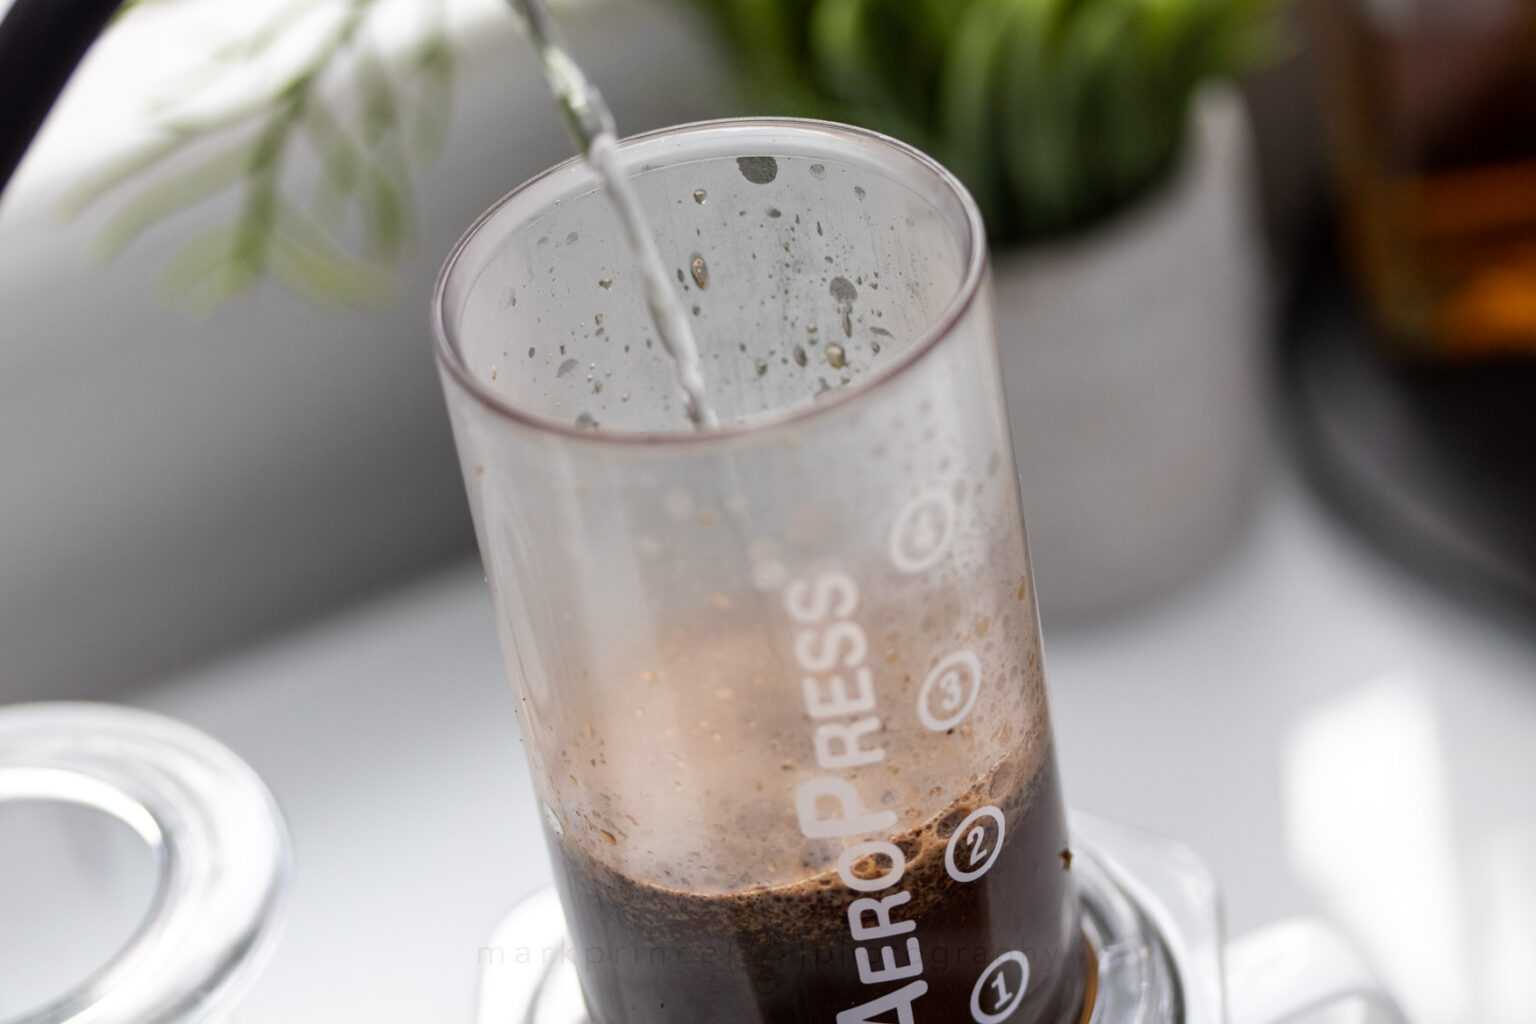 Using the AeroPress (Clear model, here) as a no-bypass brewer presents some challenges.